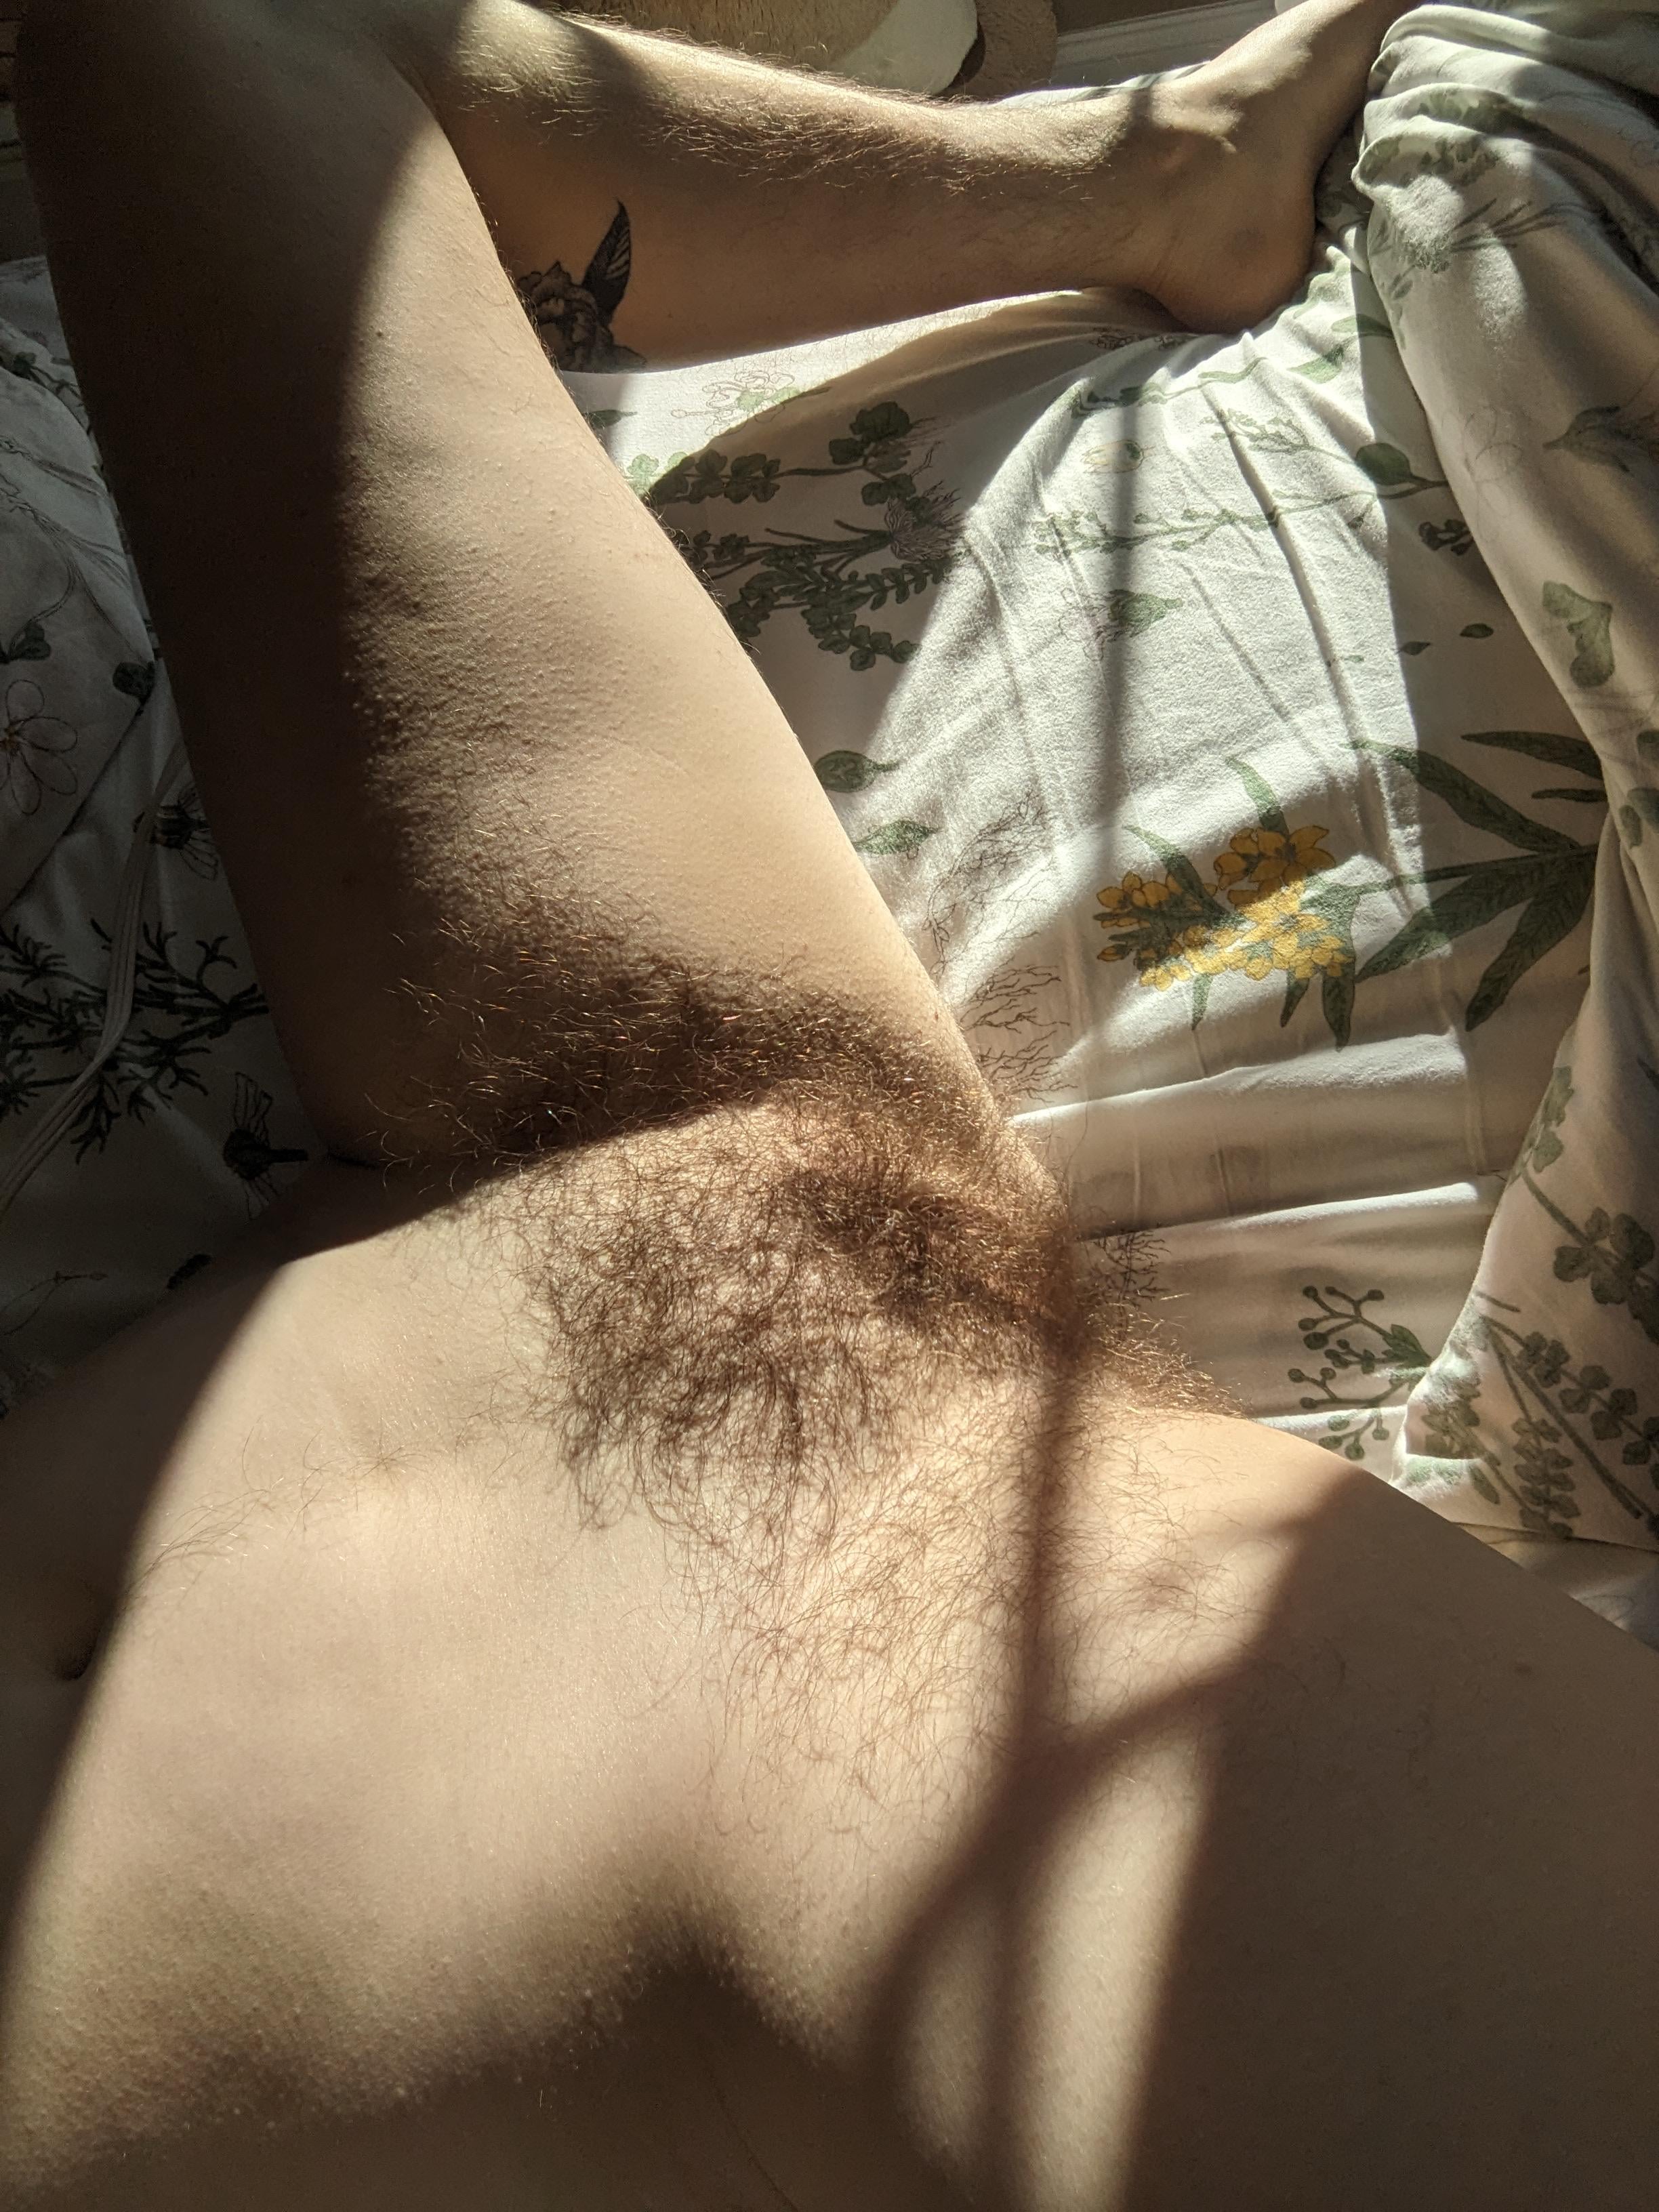 Sometimes hairy guys are also girls with tight pussies that